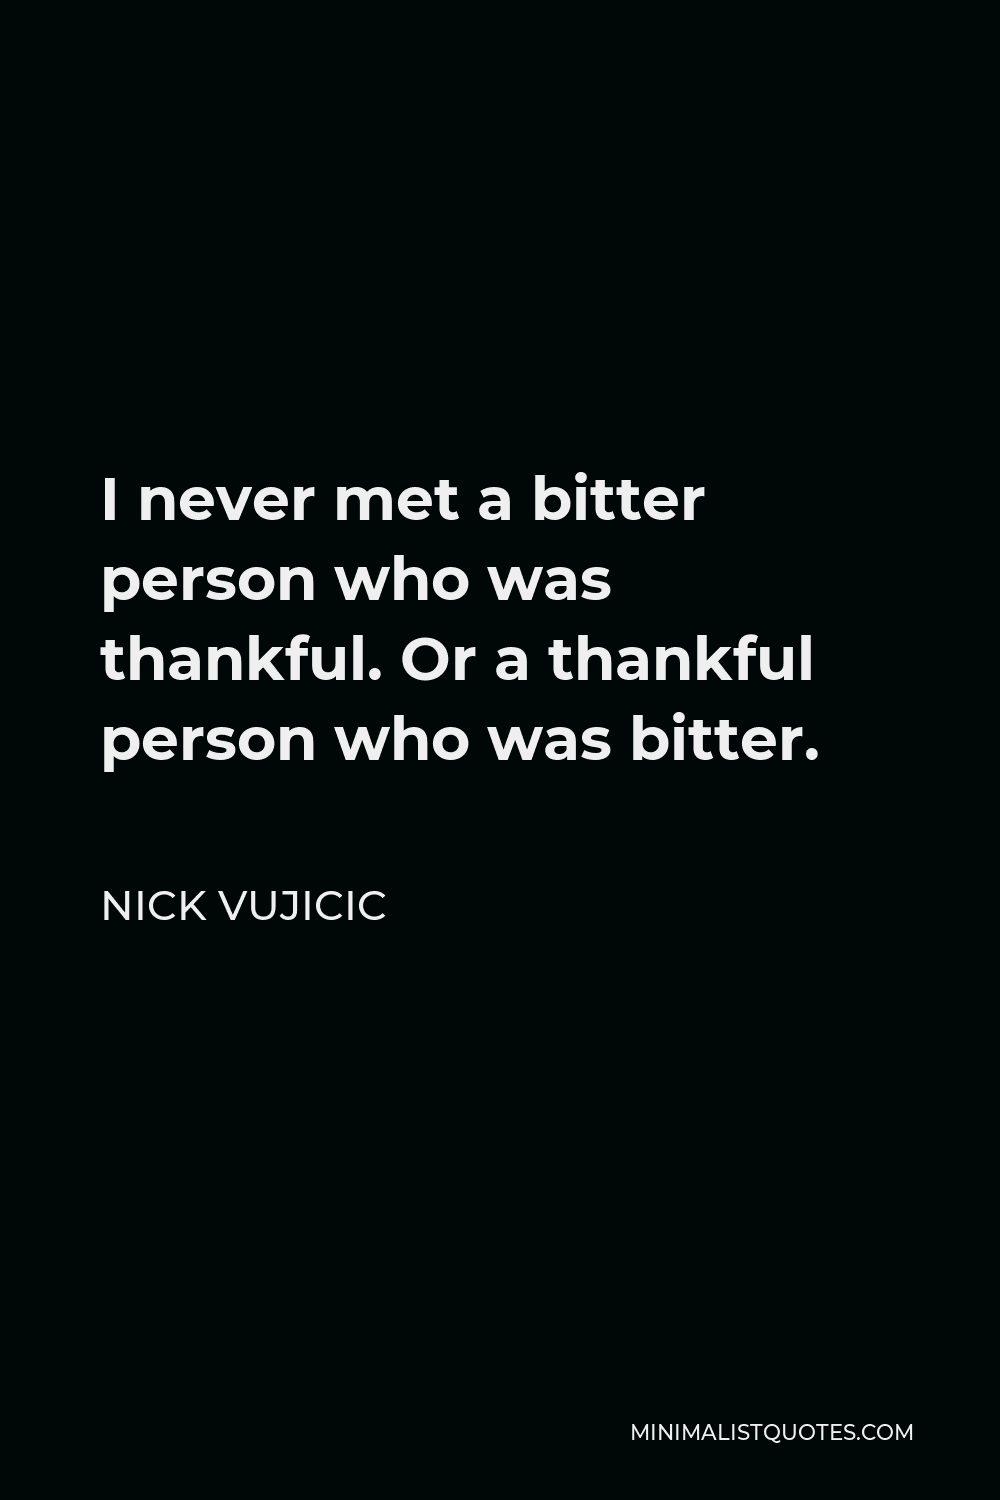 Nick Vujicic Quote - I never met a bitter person who was thankful. Or a thankful person who was bitter.